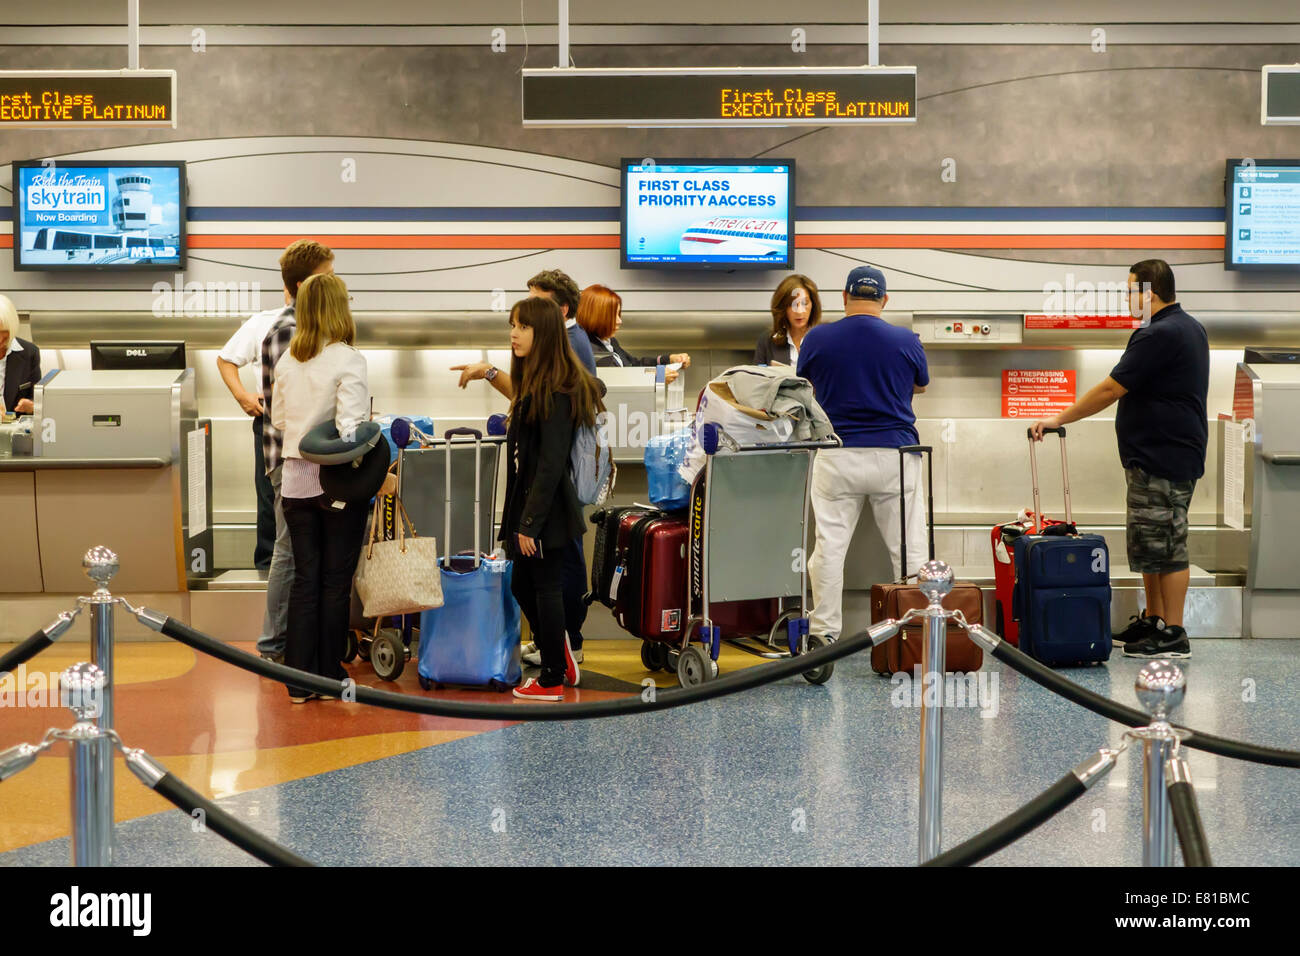 Miami Florida,International Airport,terminal,American Airlines,check-in,checking,first class,ticket counter,FL140305087 Stock Photo